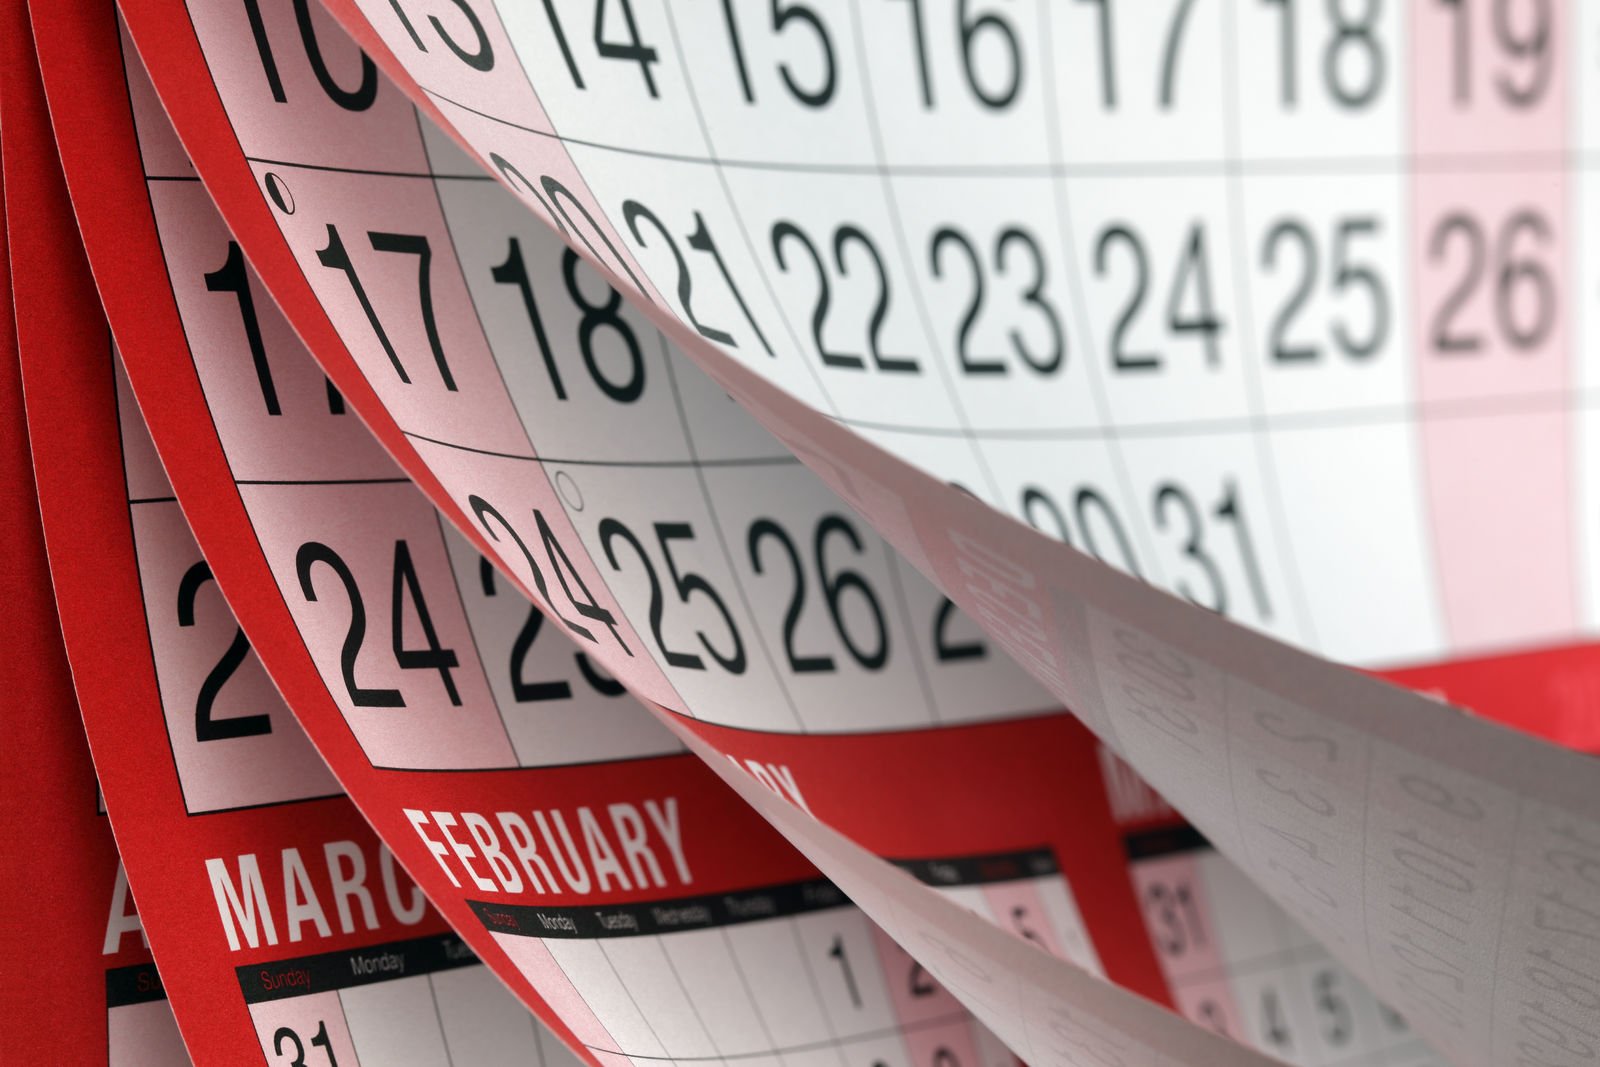 Car Insurance Due Date: How Can You Find It?